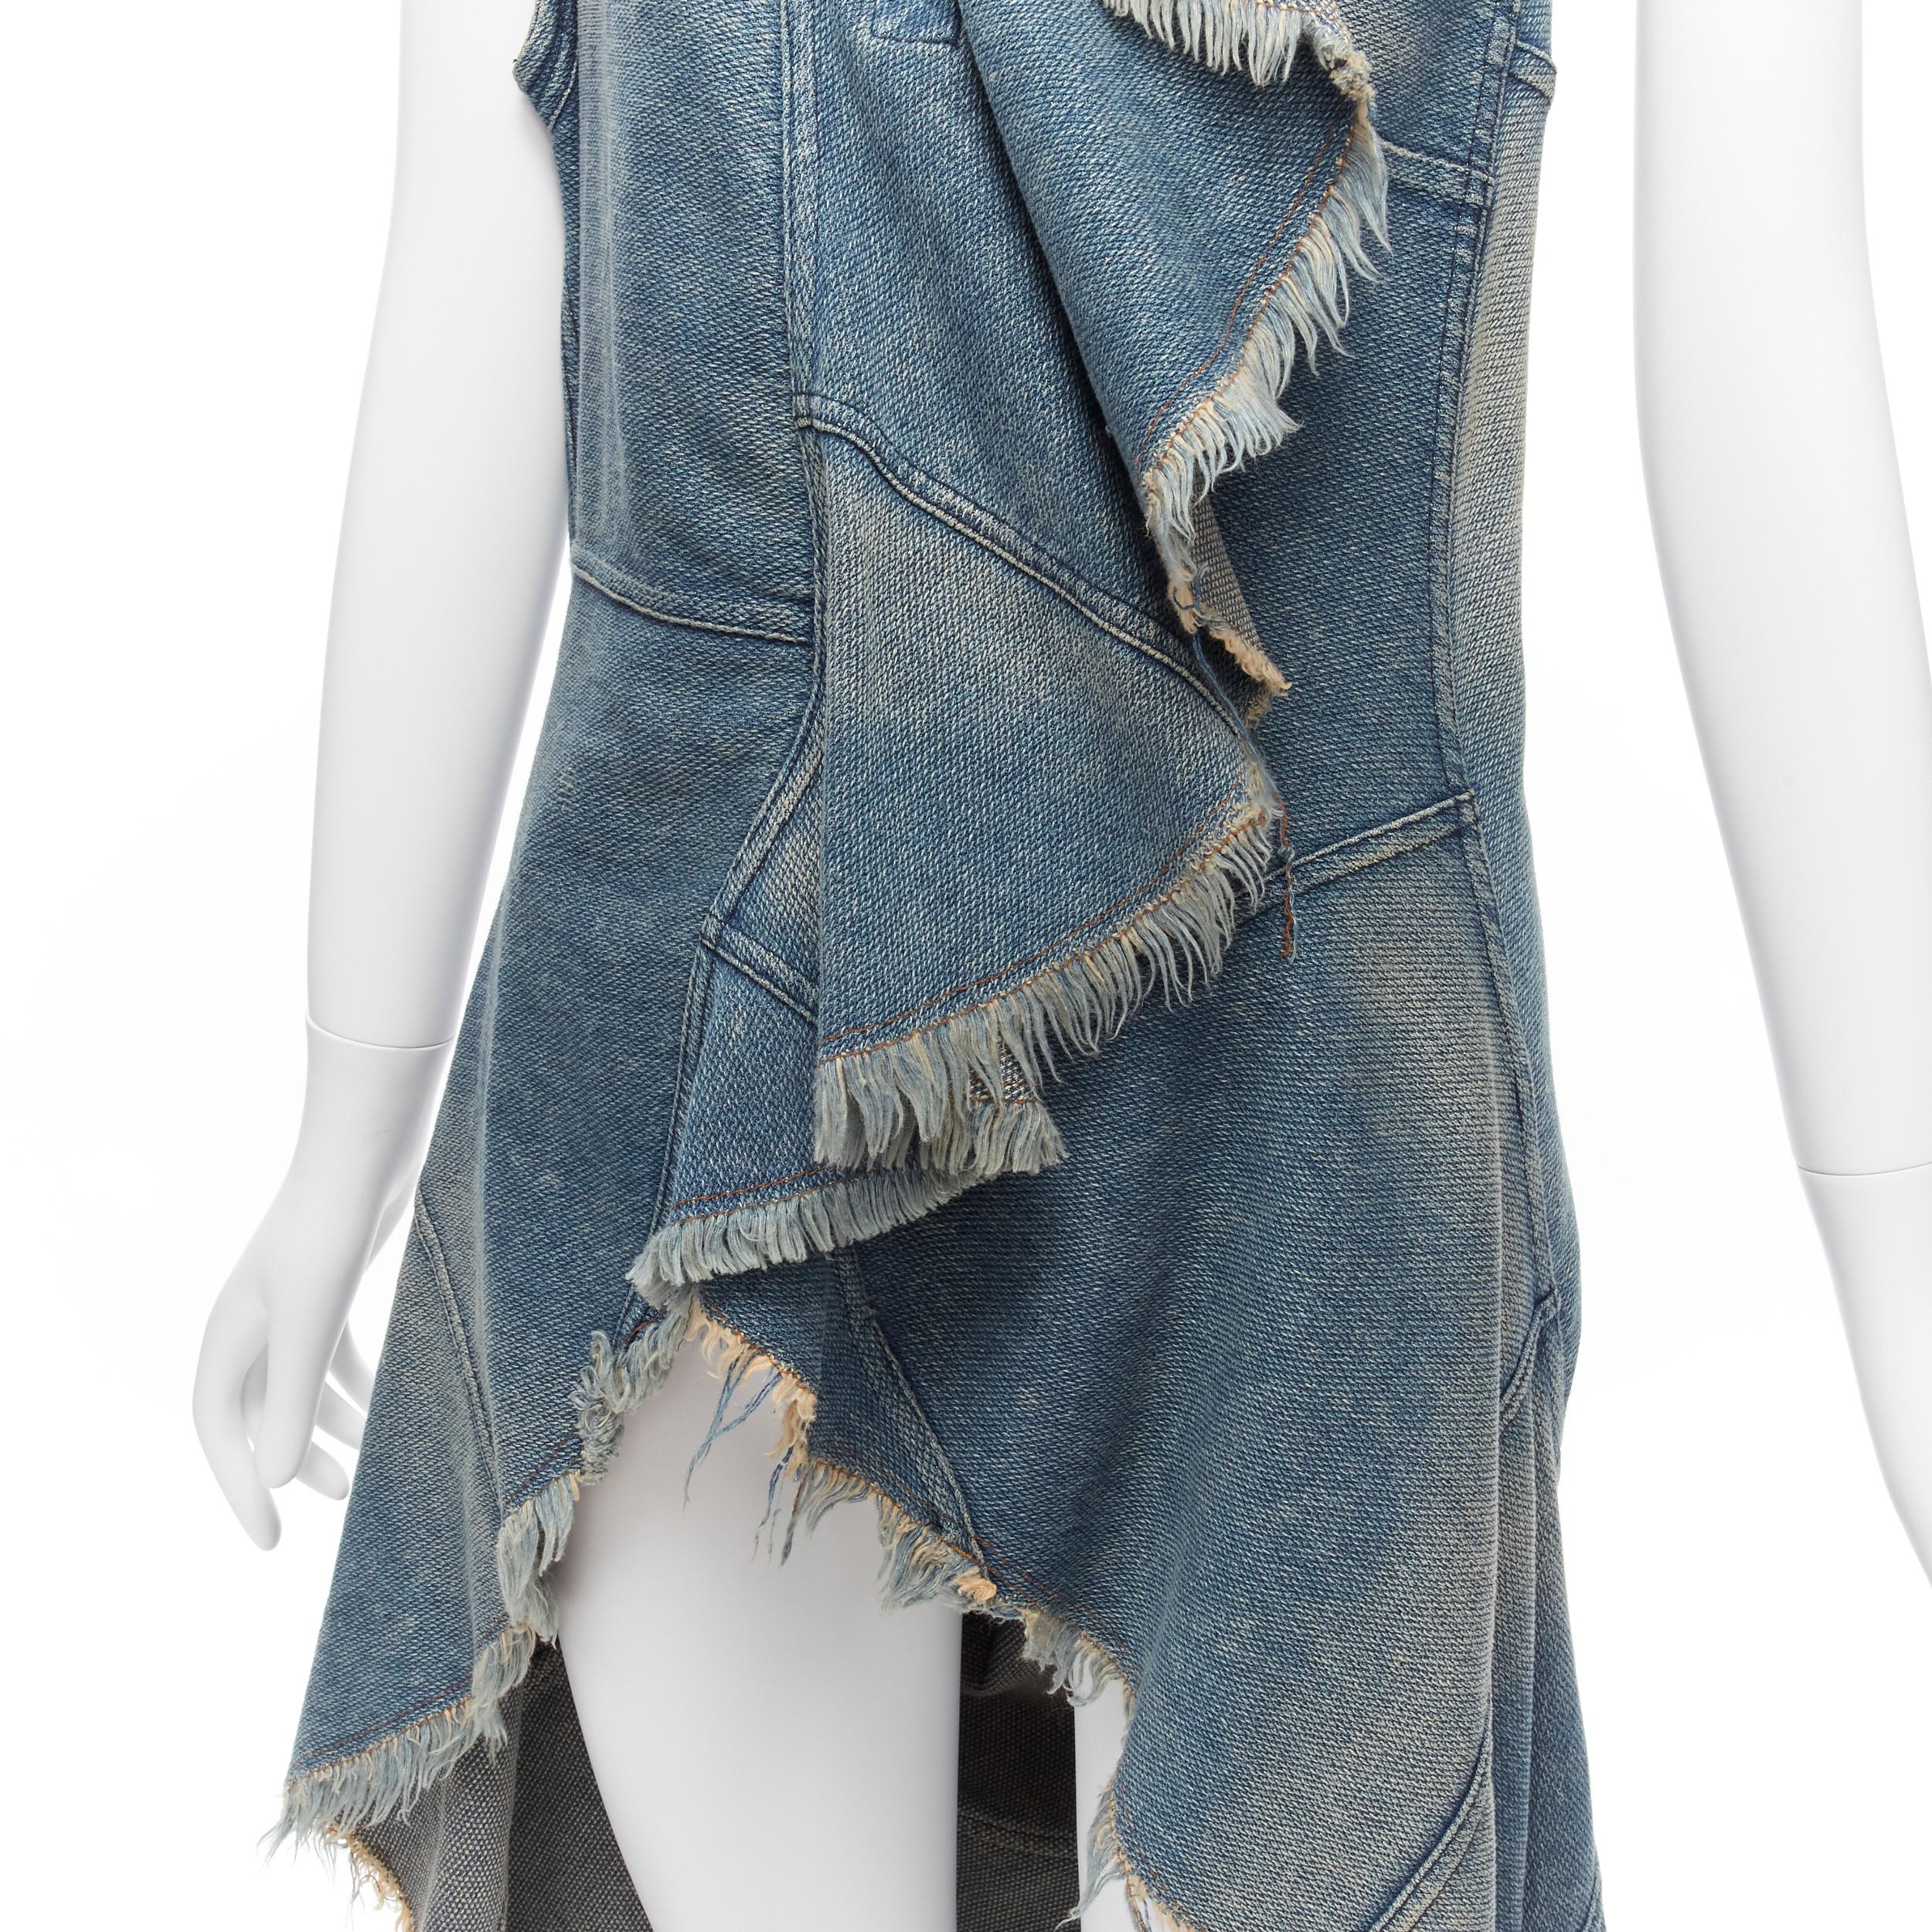 JUNYA WATANABE 2001 Vintage distressed denim deconstructed beggar look hi low wrap vest M
Reference: CRTI/A00447
Brand: Junya Watanabe
Designer: Junya Watanabe
Collection: 2001
Material: Denim
Color: Blue
Pattern: Solid
Closure: Snap Buttons
Extra